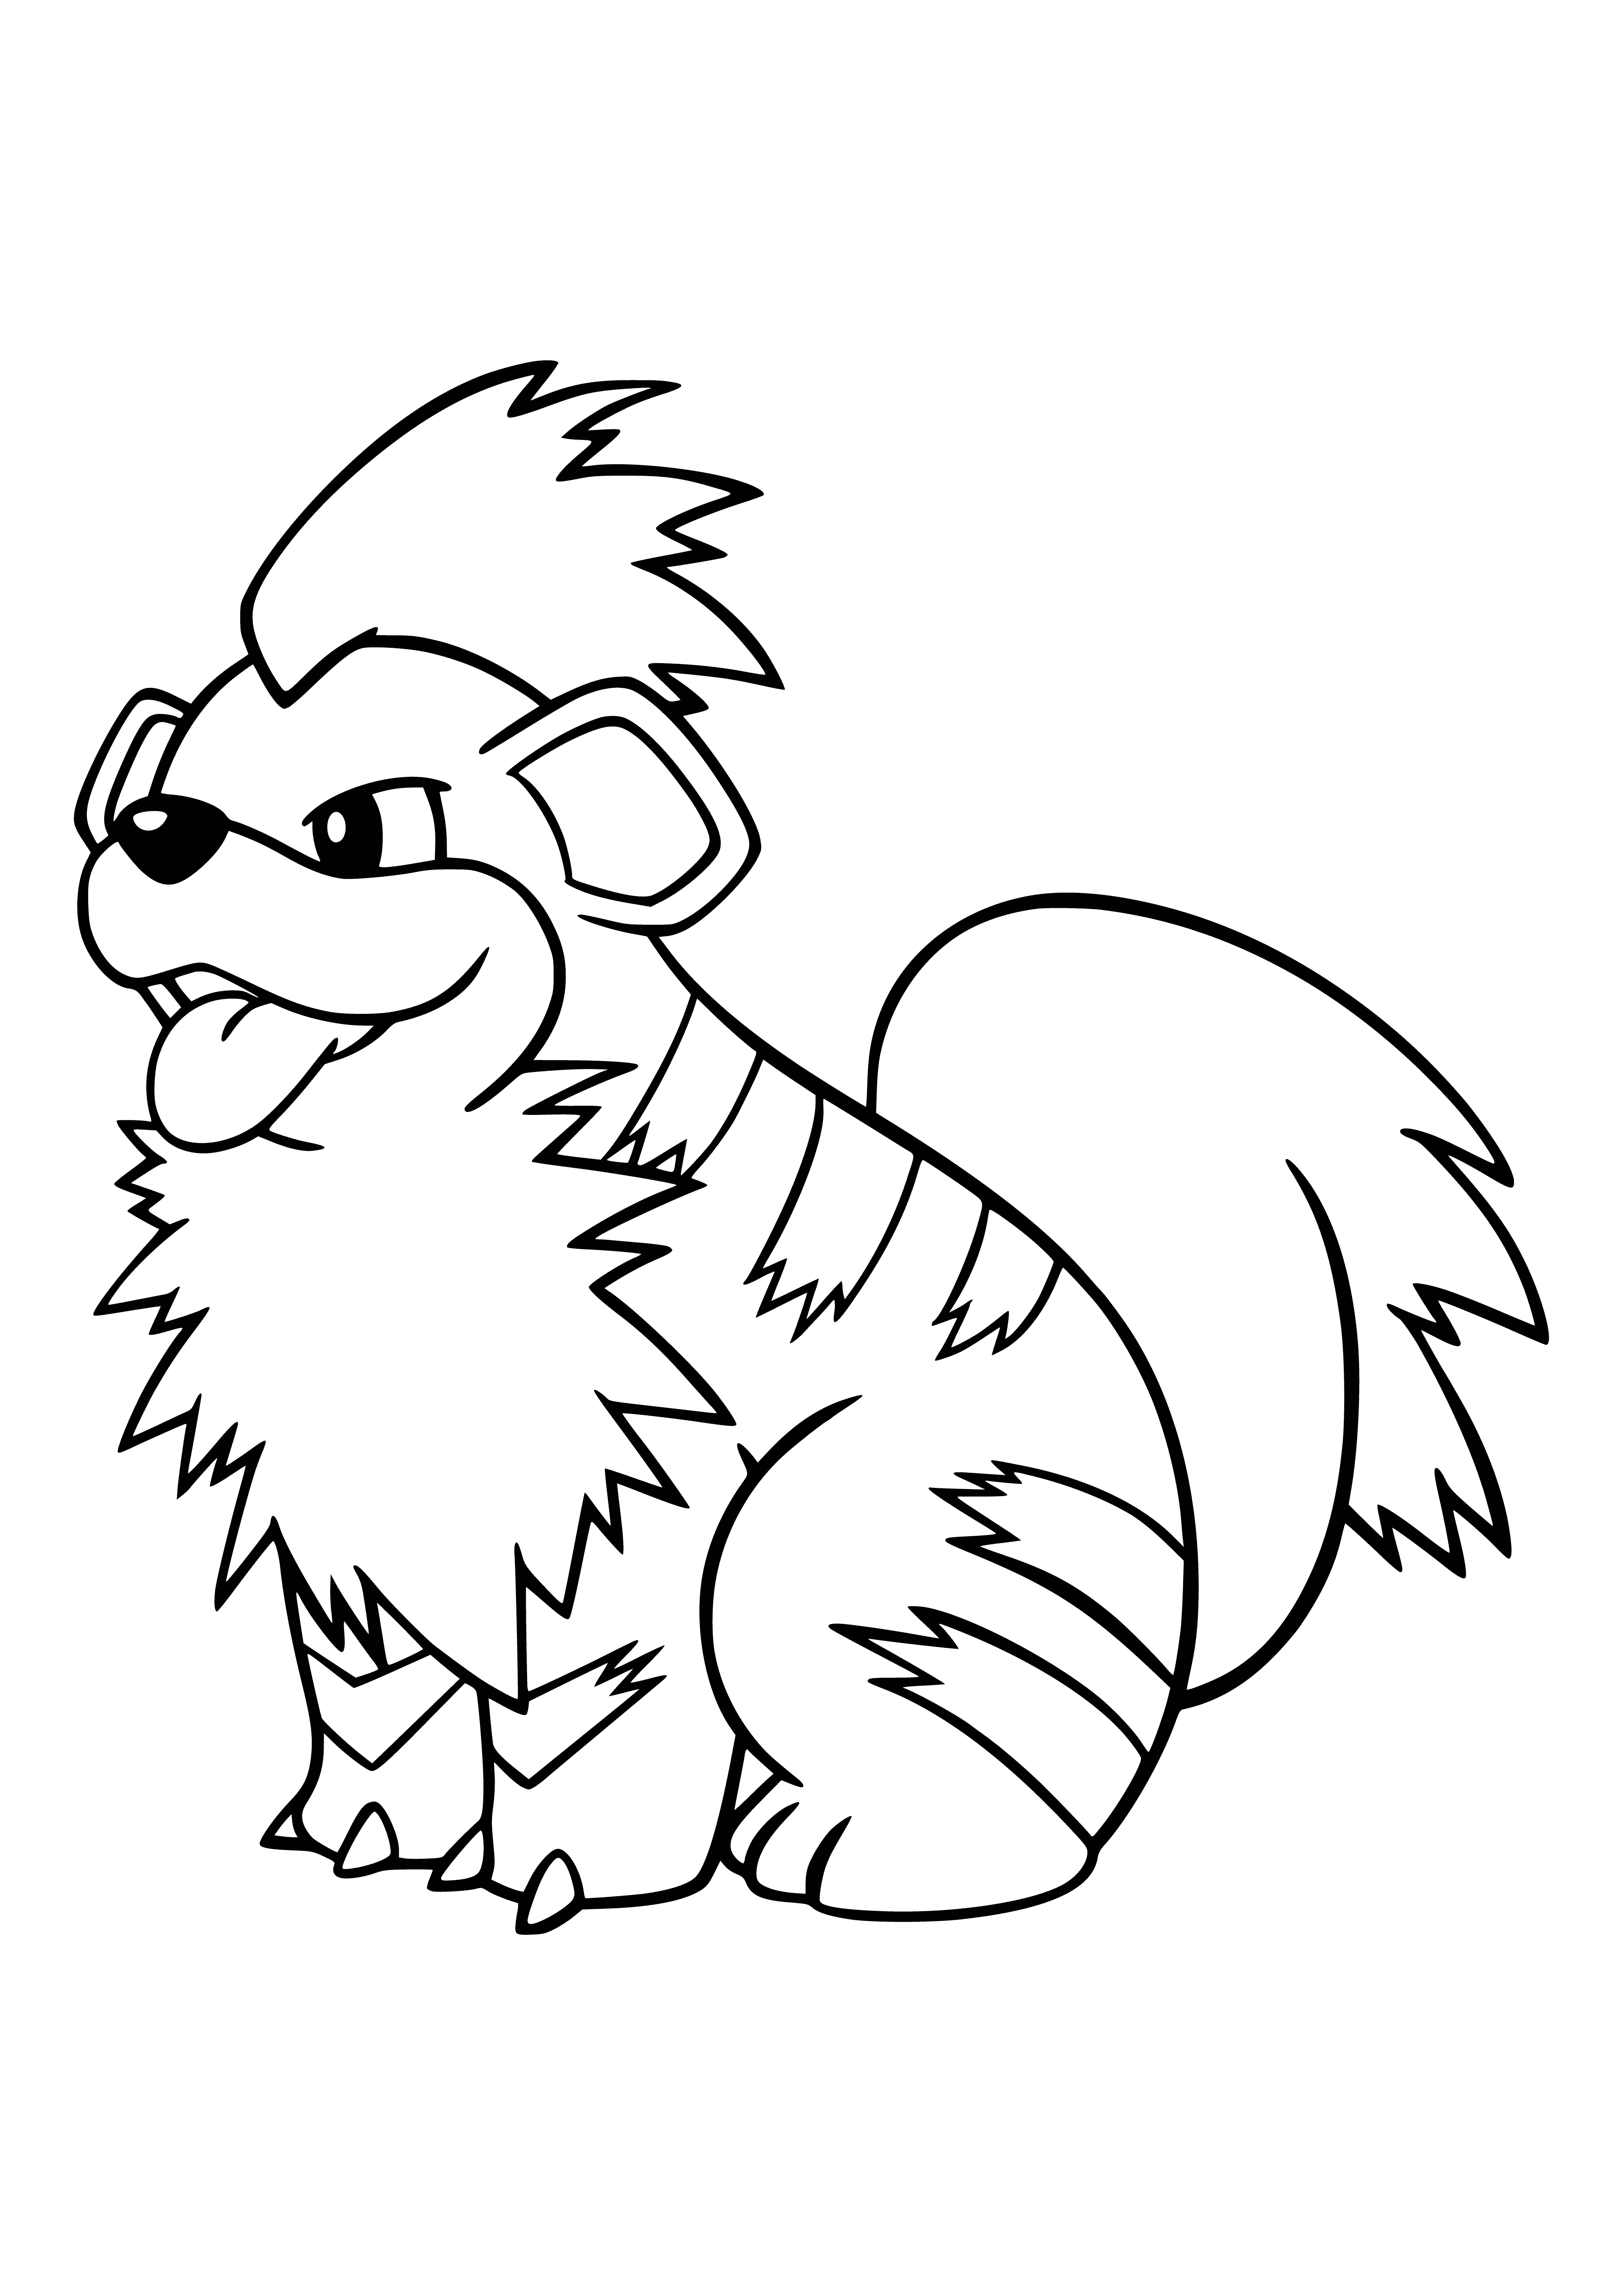 coloring page: Orange four-legged Pokemon with black stripes, yellow eyes, two small teeth, and long tongue. Tuft of fur on head, slender body, and long tail.